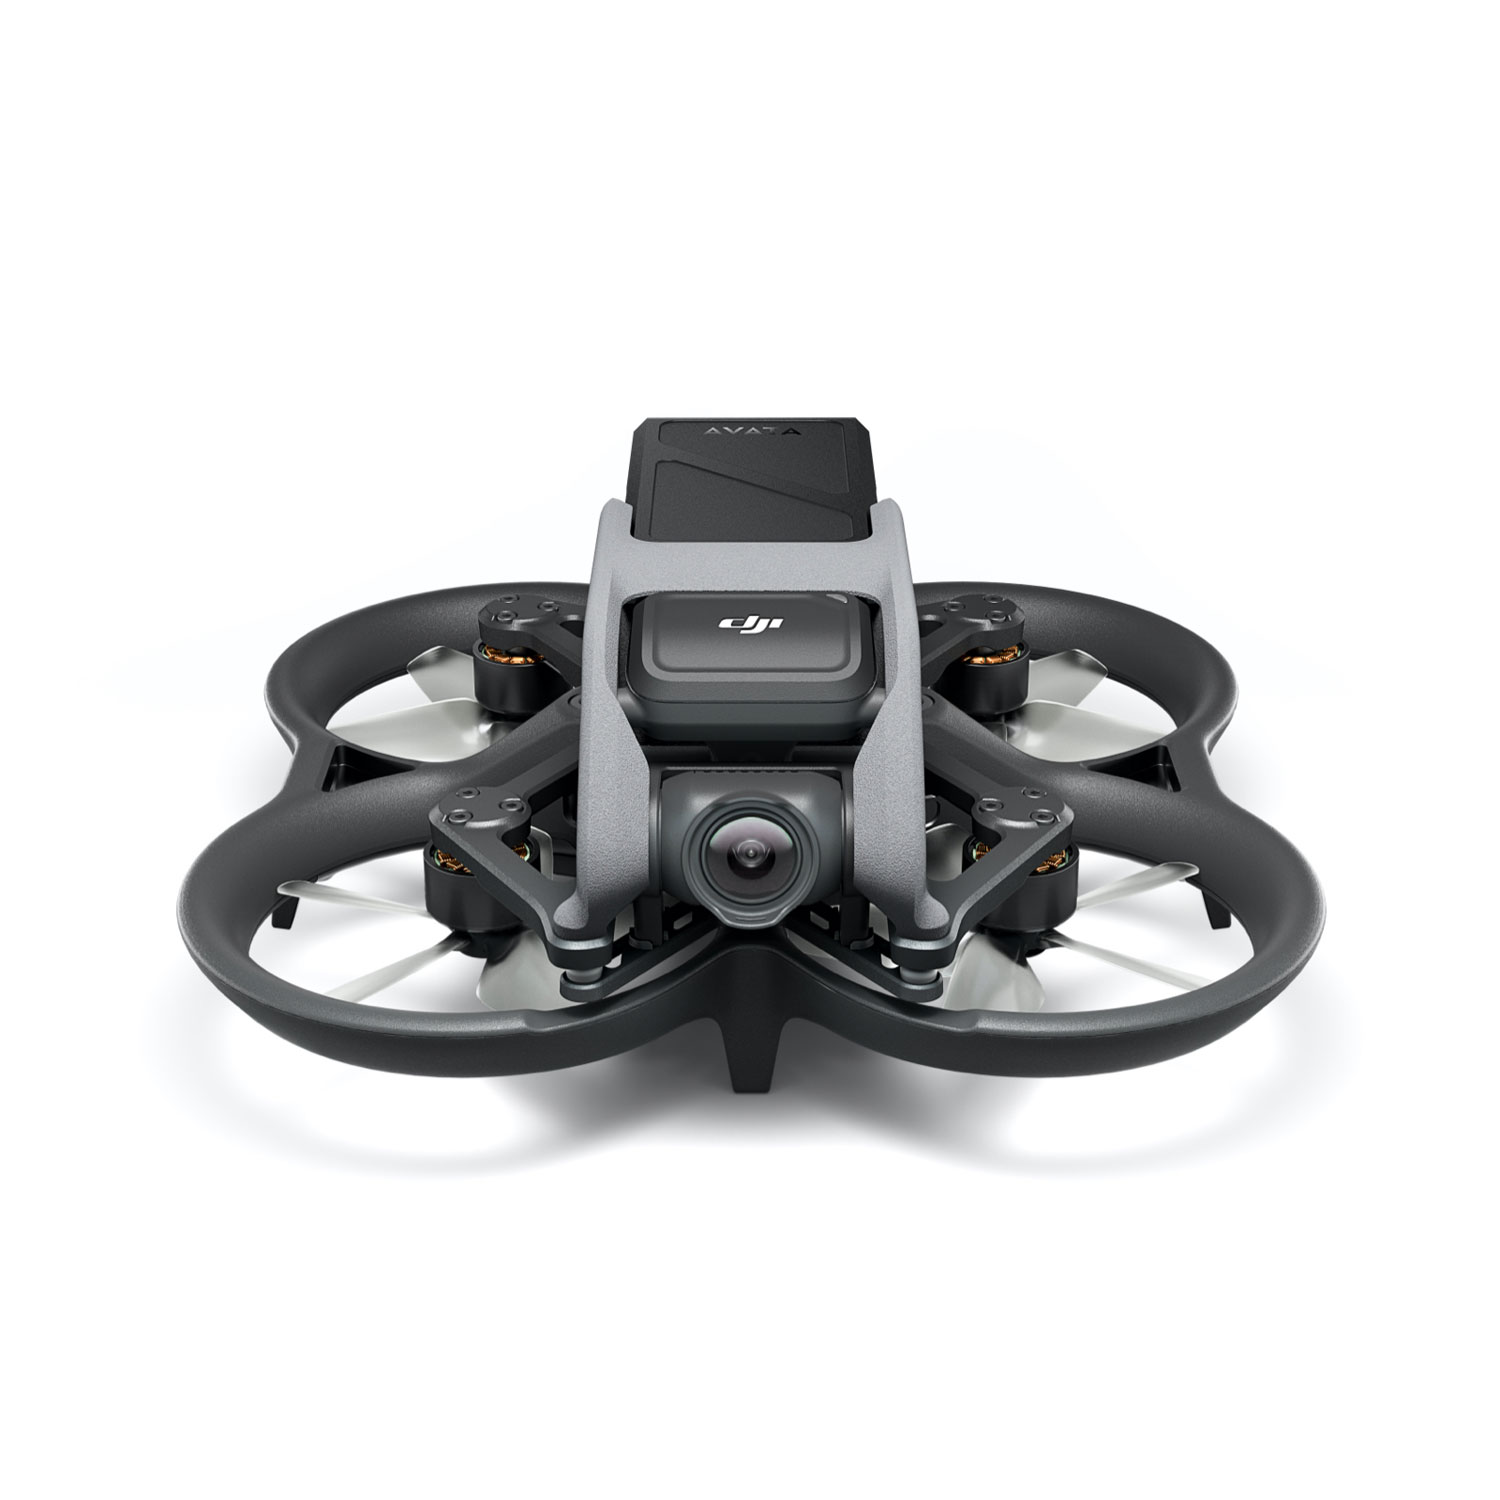 DJI Avata Quadcopter Drone (Goggles & Controller Not Included) - Grey